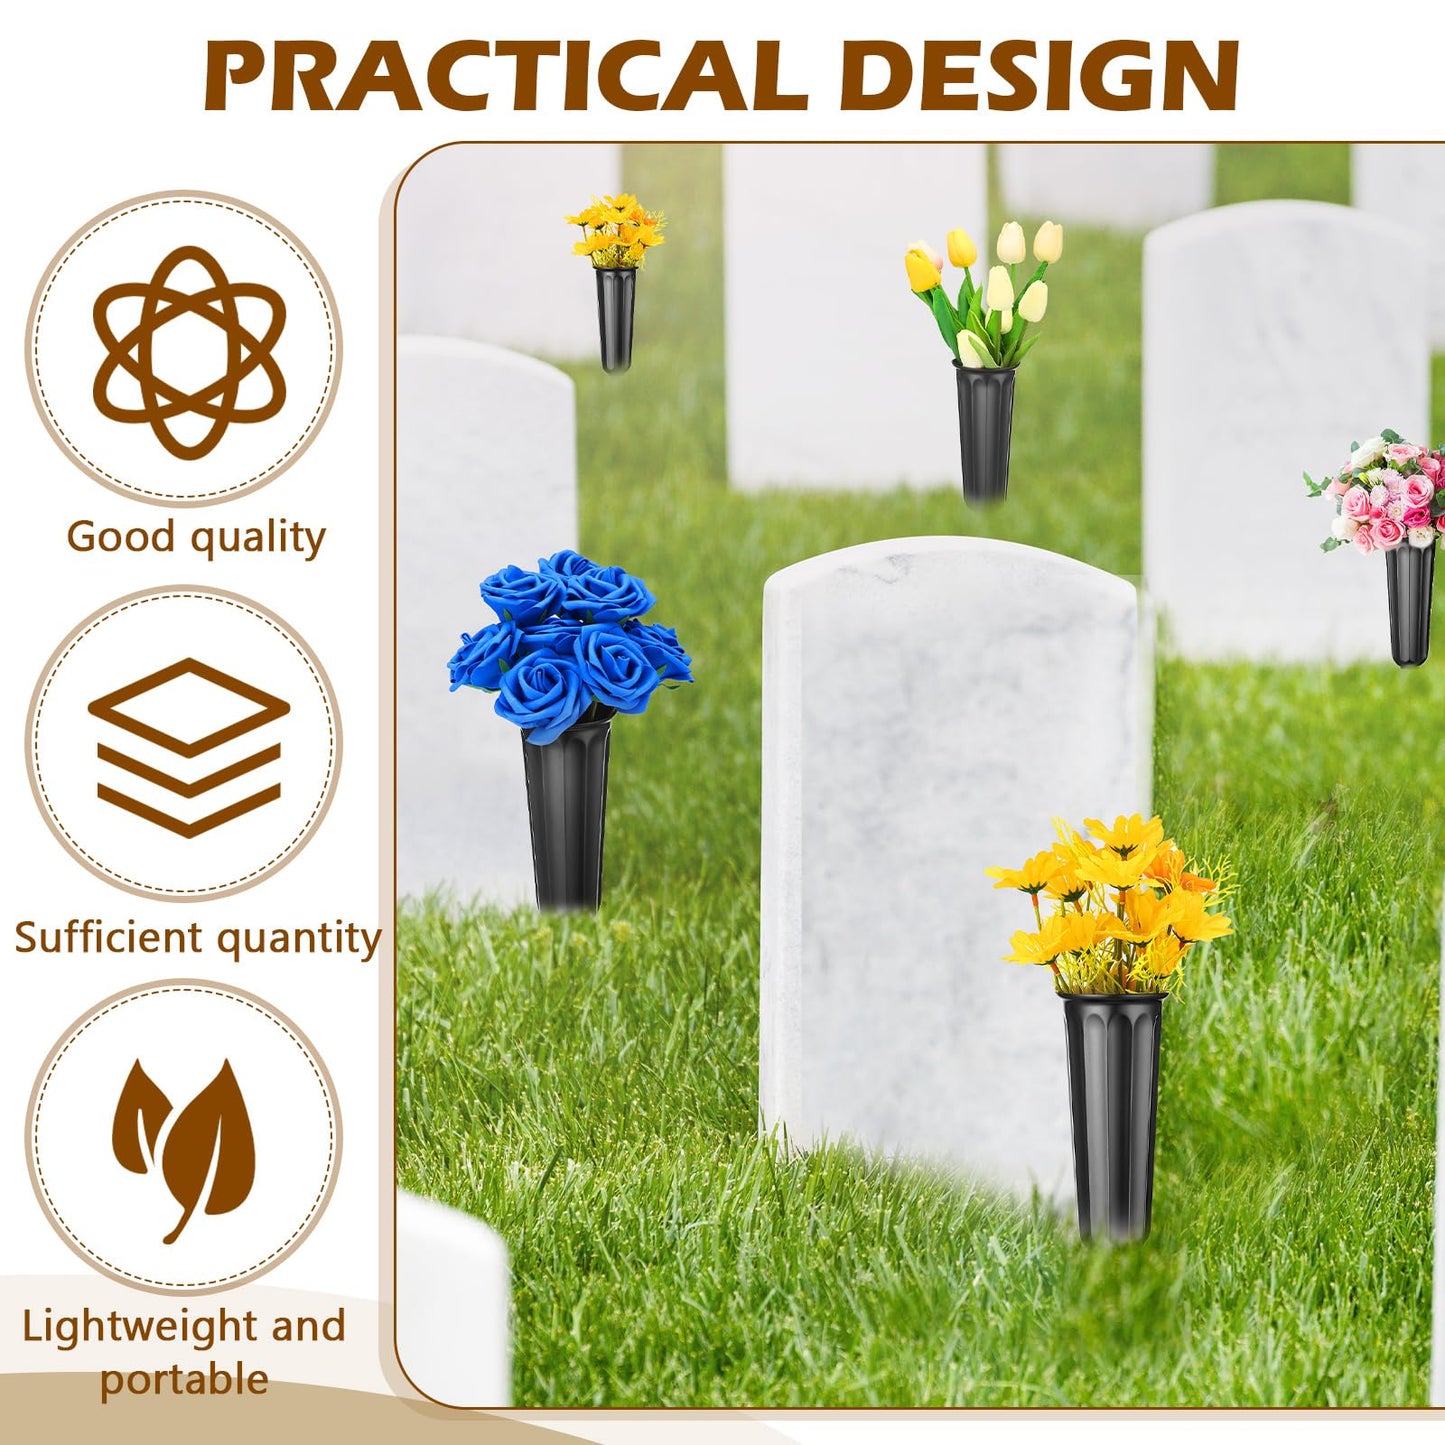 12 Pcs Cemetery Vases with Spikes Plastic Memorial Floral Vases Grave Flower Holder Cone In Ground Vases with Stakes for Lawn Headstone Graveside Decoration Artificial Fresh Flowers (Black)